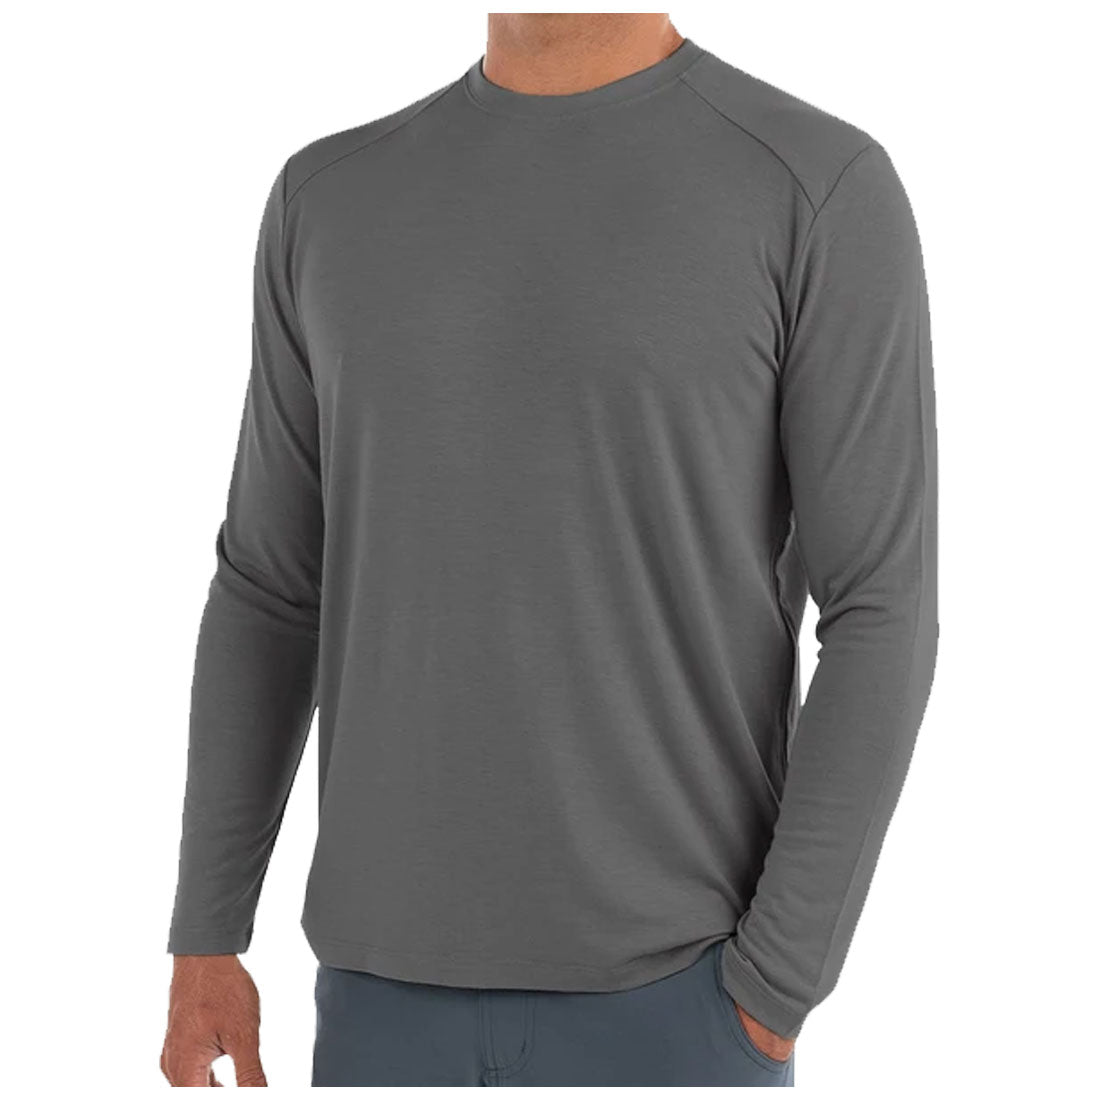 Free Fly Bamboo Midweight Long Sleeve Top - Men's